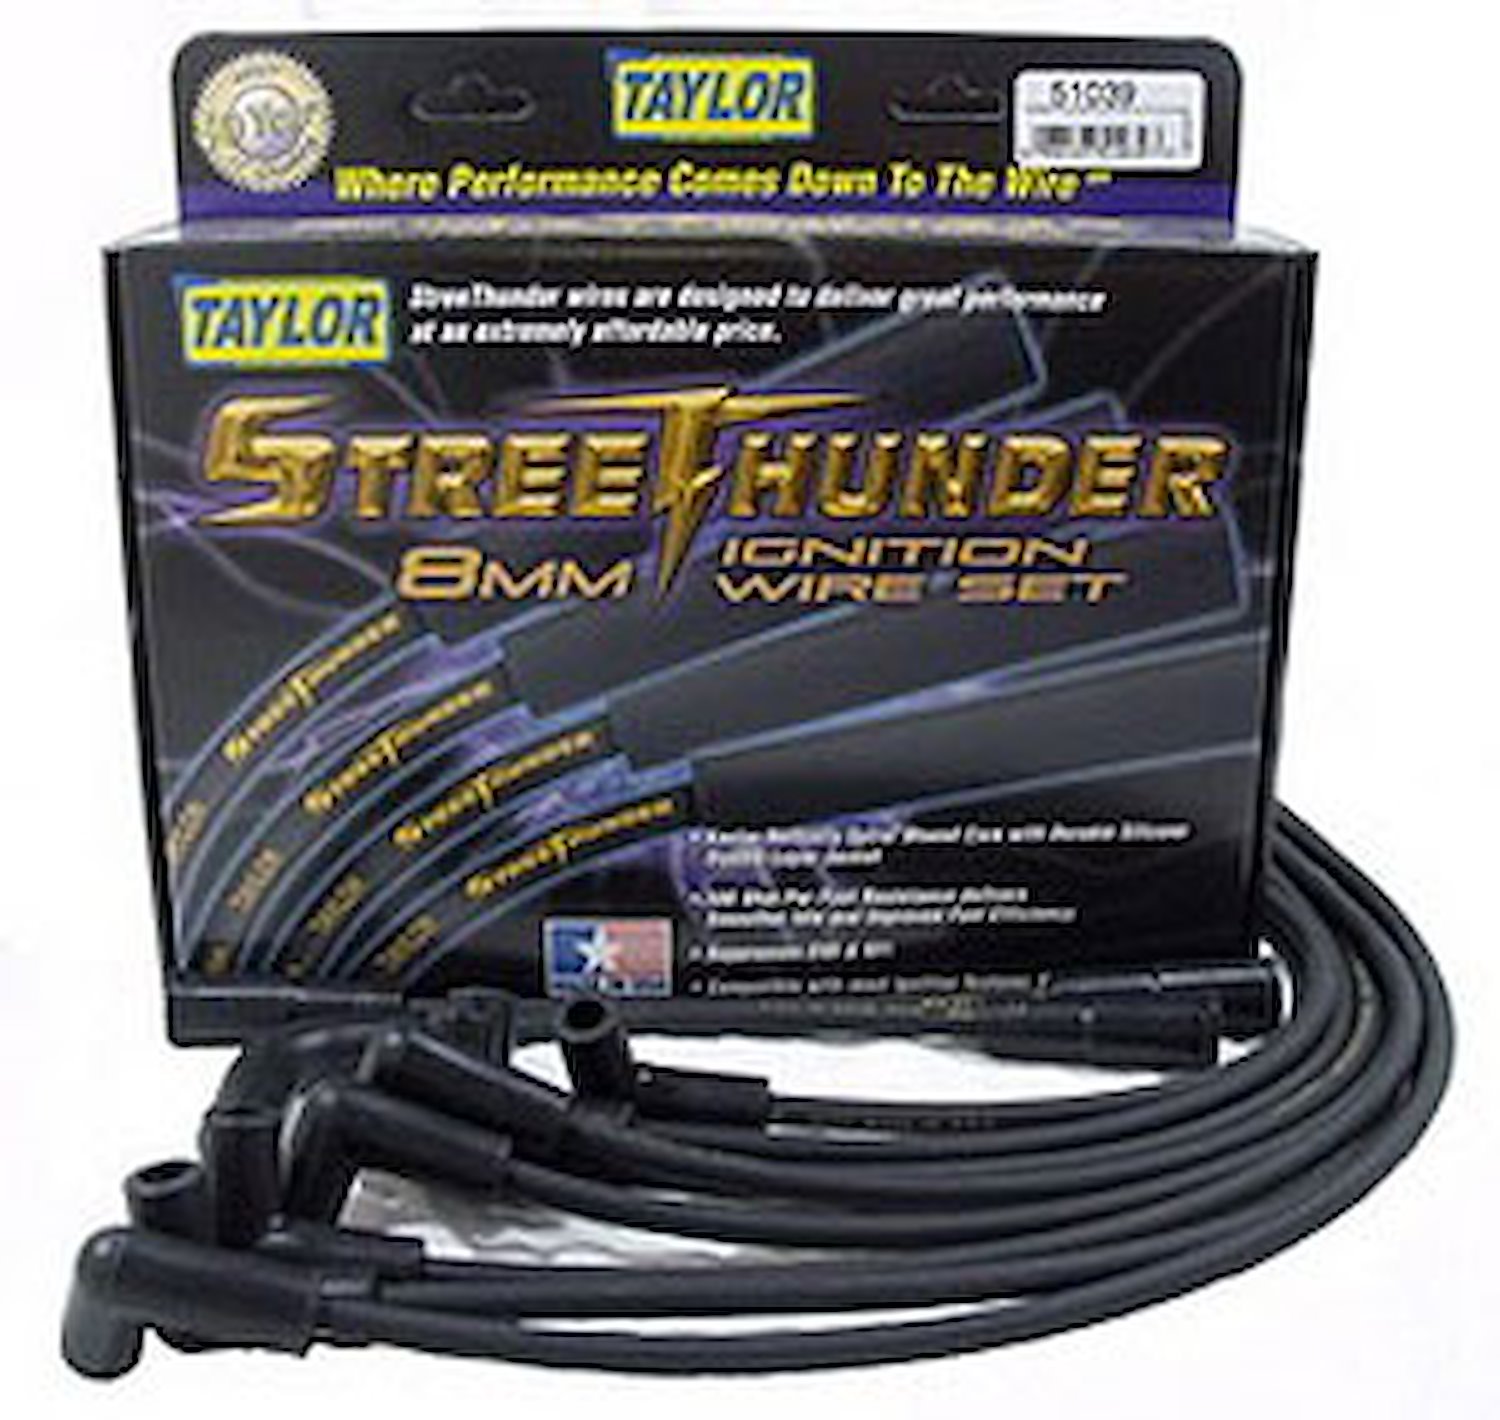 Street Thunder 8mm Spark Plug Wires 1996-1997 Chevy